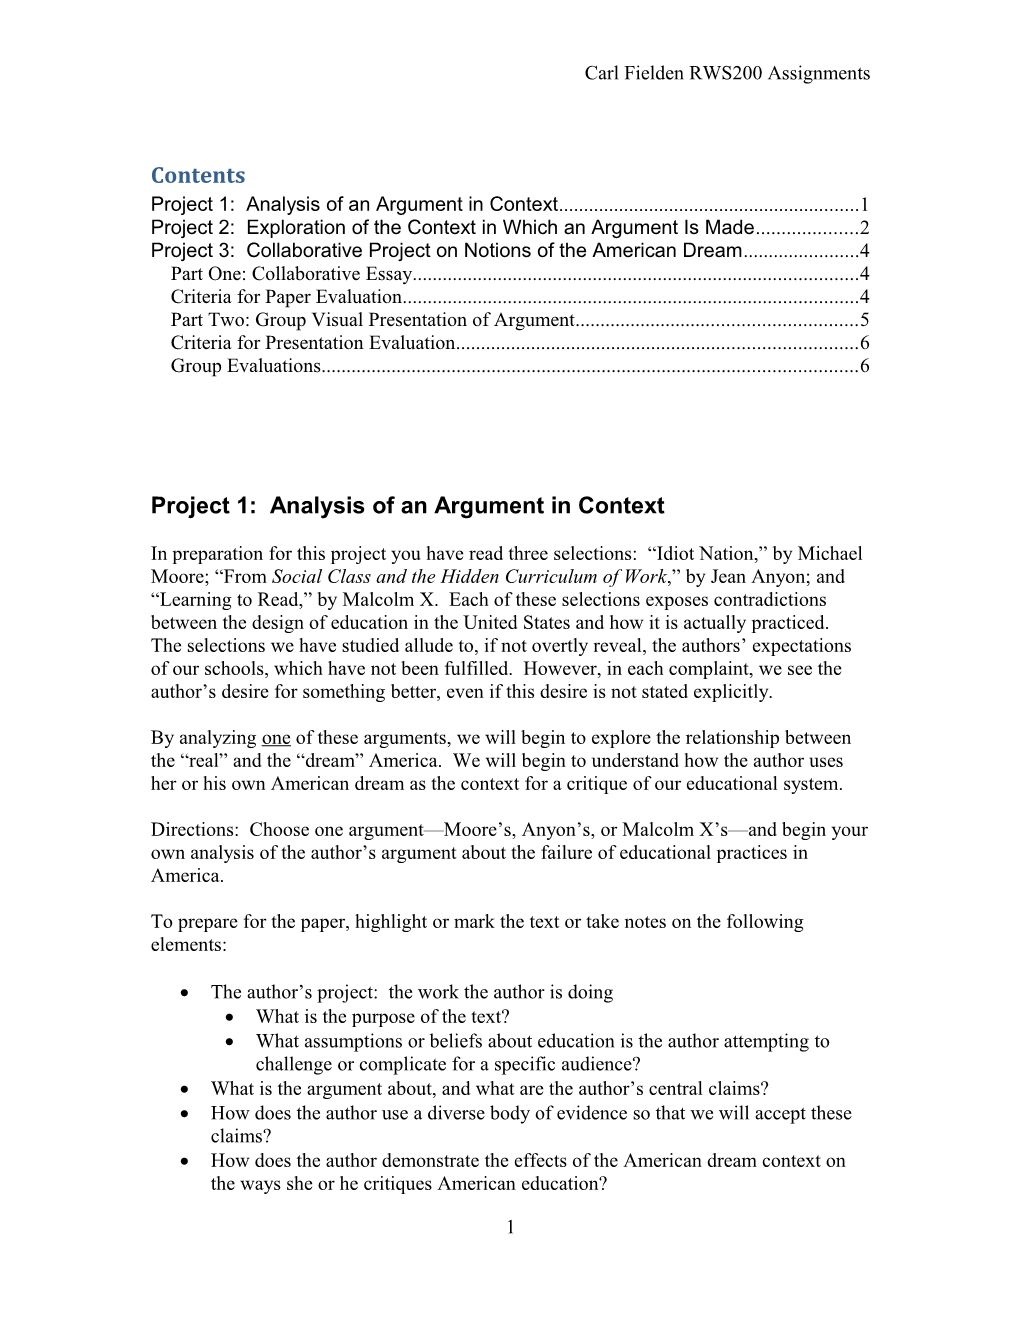 Project 1: Analysis of an Argument in Context